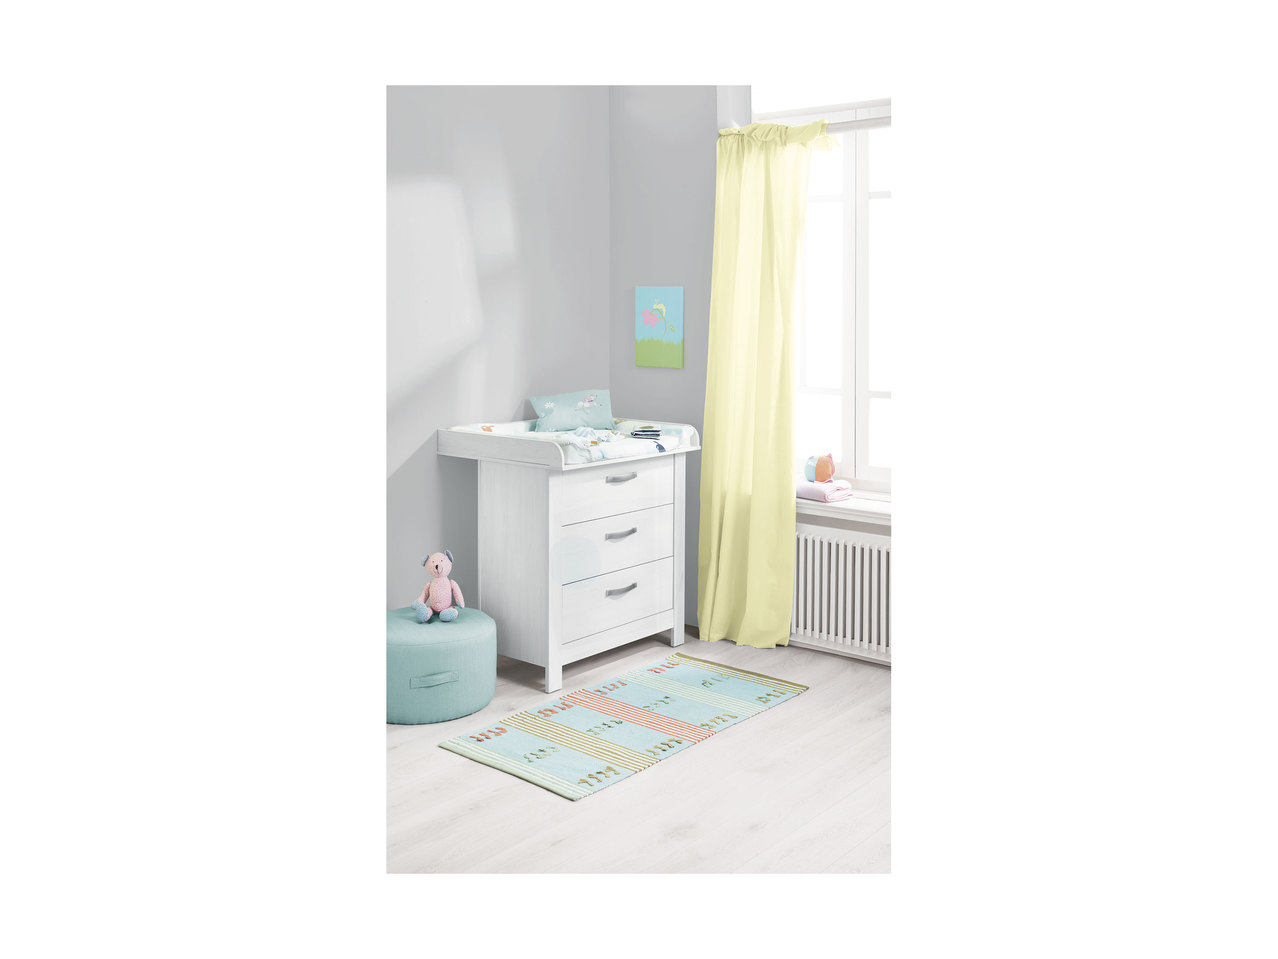 lidl baby changing unit